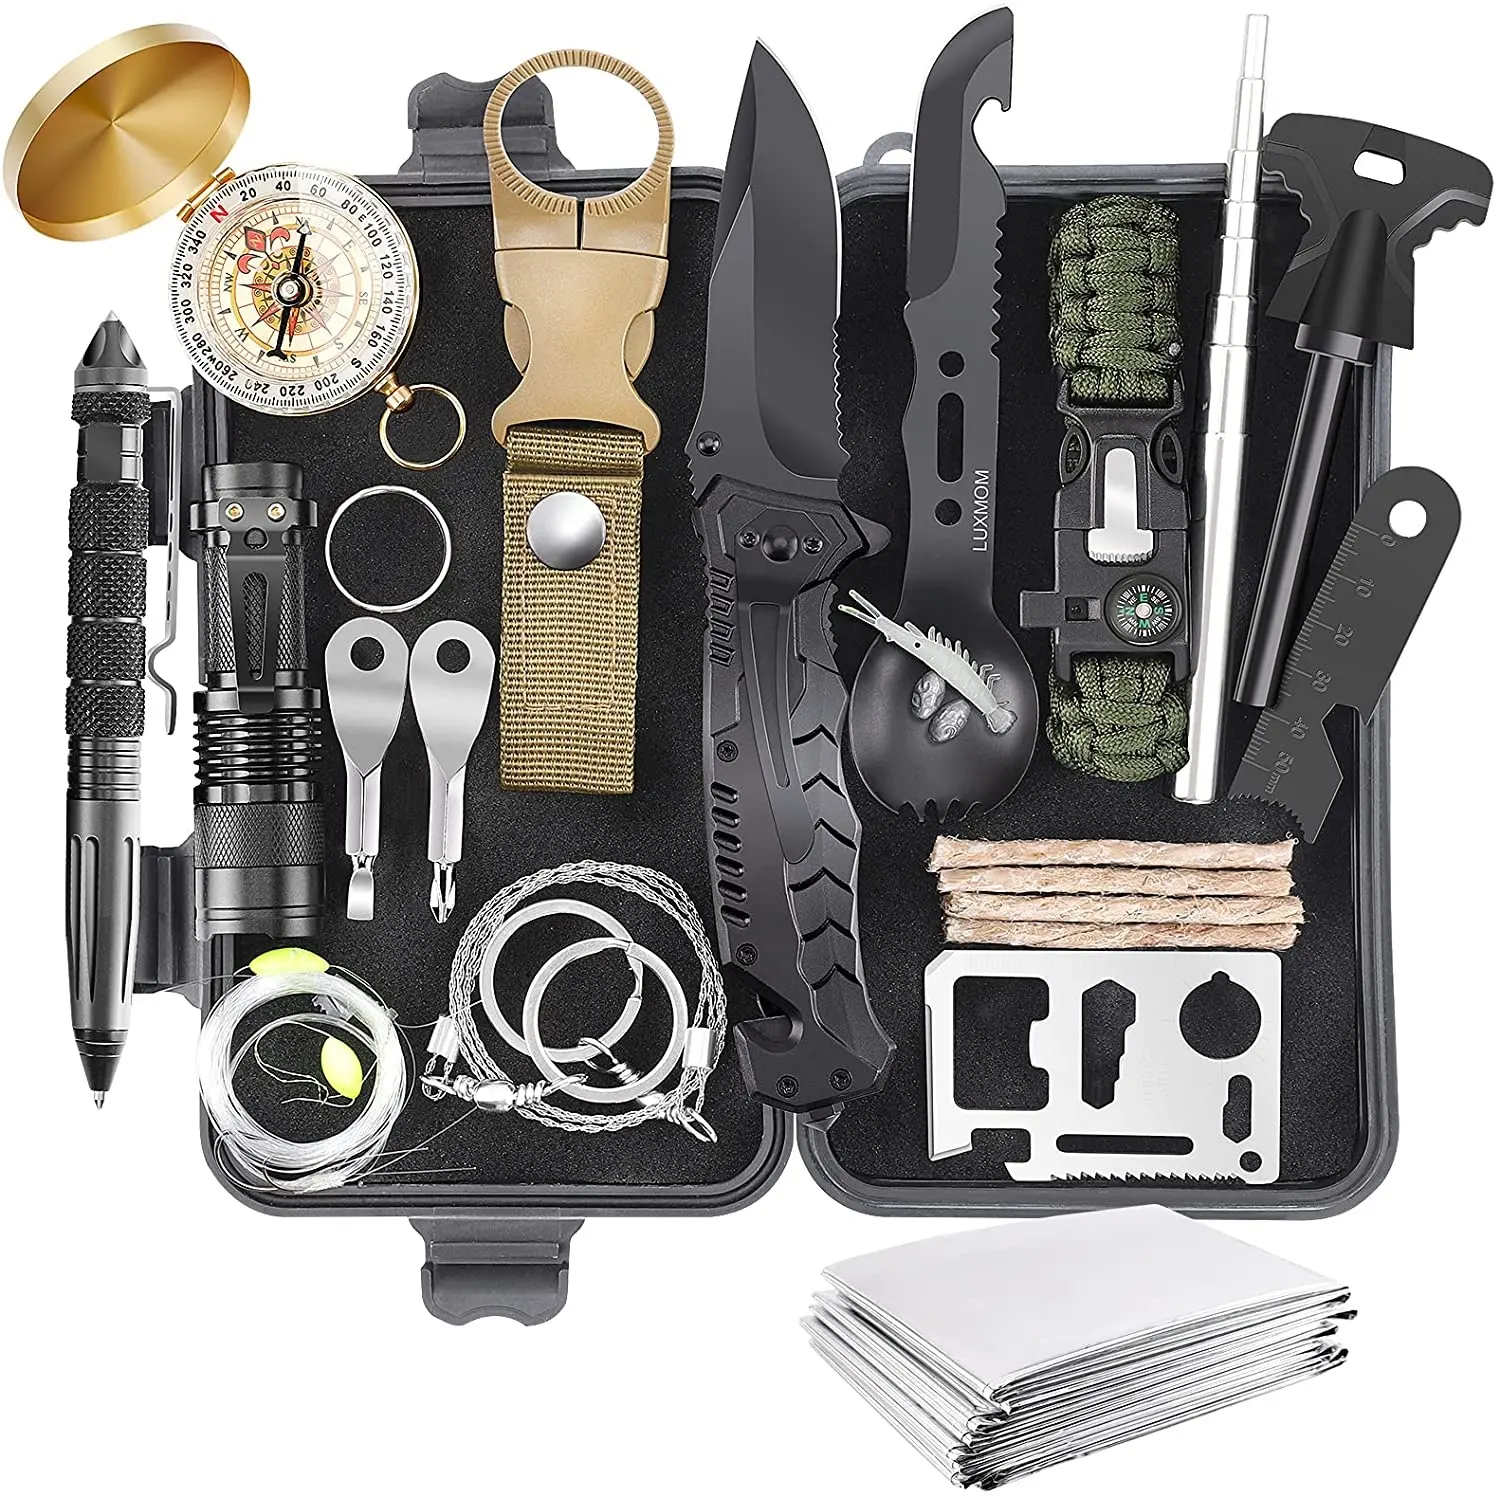 28 in 1 Survival Kit Survival Gear and Equipment Supplies Kits Christmas Stocking Stuffers for Families Outdoors Camping Hiking